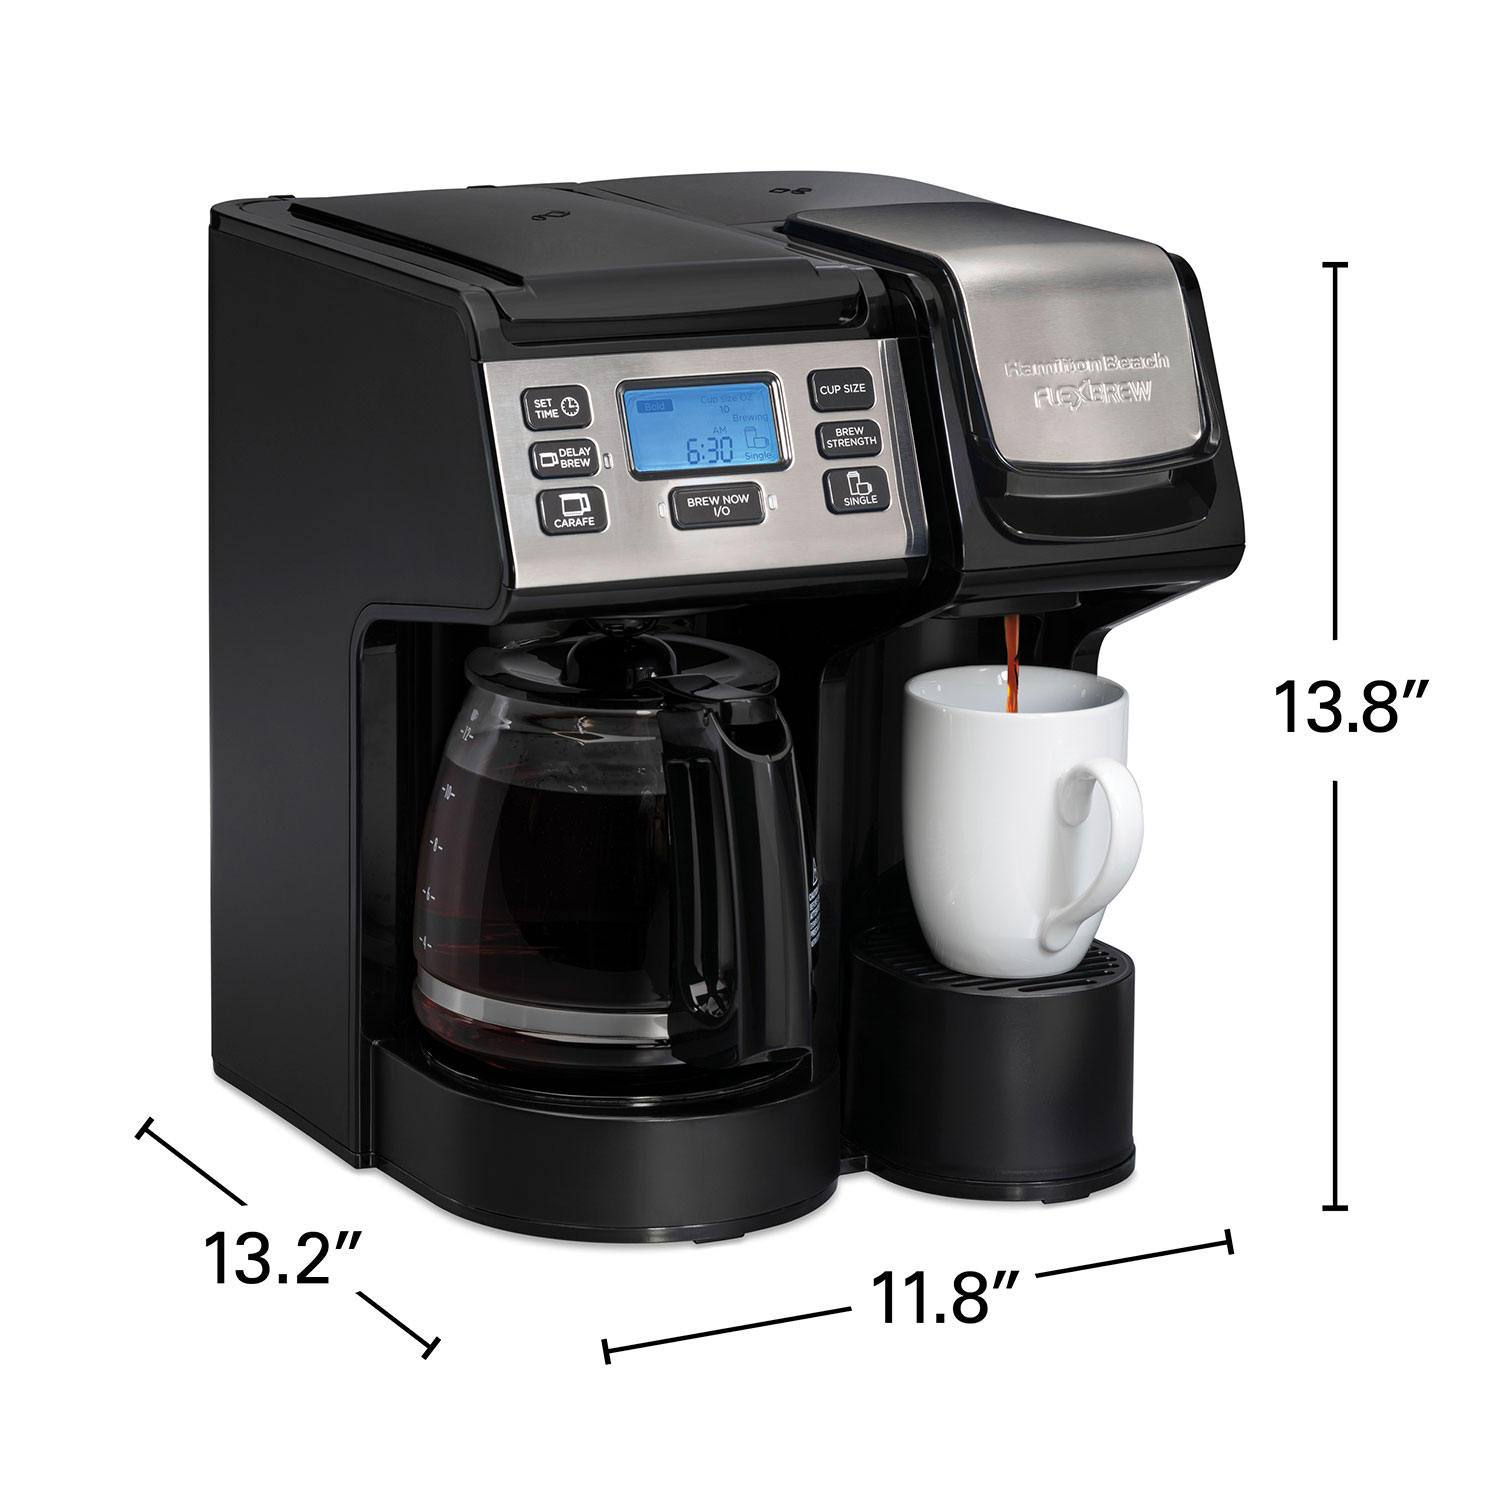 DETAILED REVIEW Hamilton Beach 2-Way Brewer Coffee Maker Single